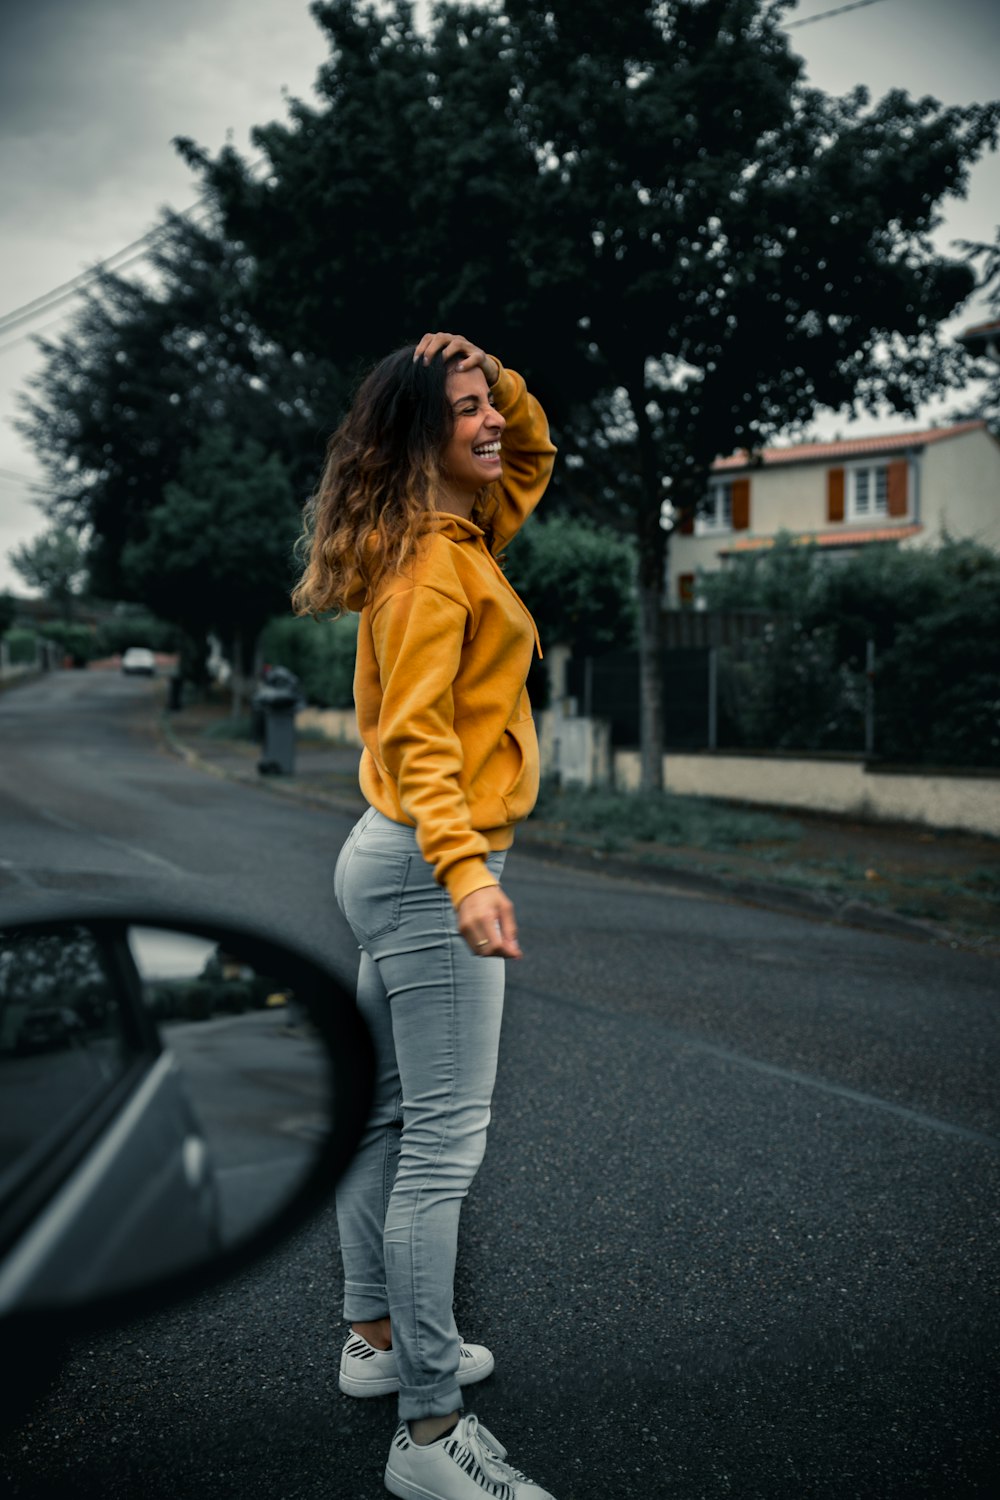 Woman in yellow hoodie and gray pants standing on road during daytime photo  – Free Lyon Image on Unsplash